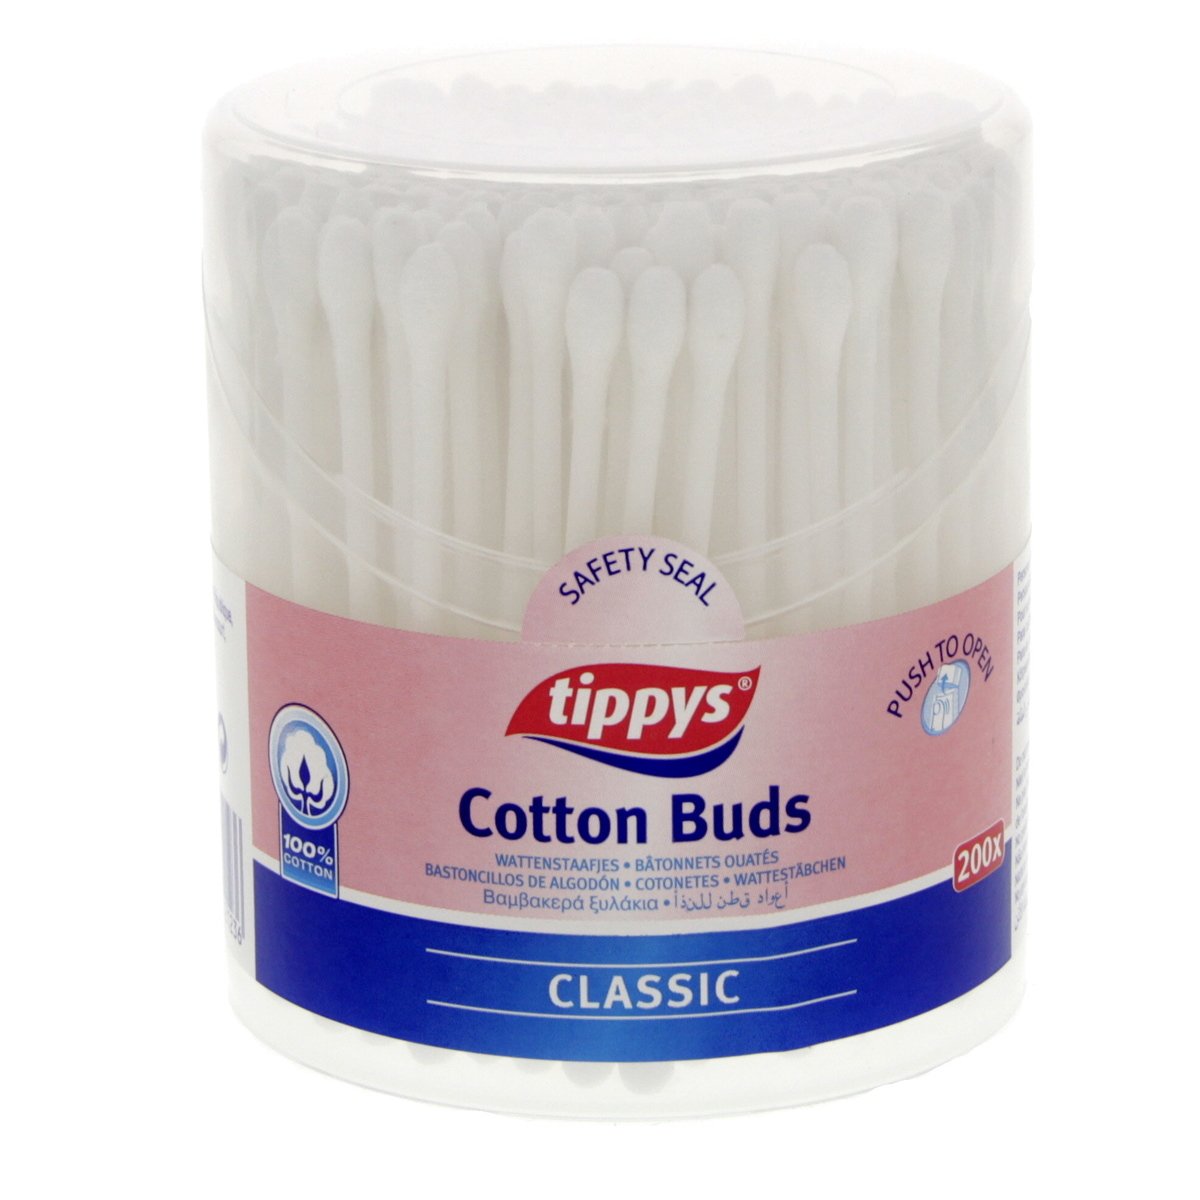 Tippys Classic Cotton Buds 200pcs Online at Best Price | Cotton Buds ...